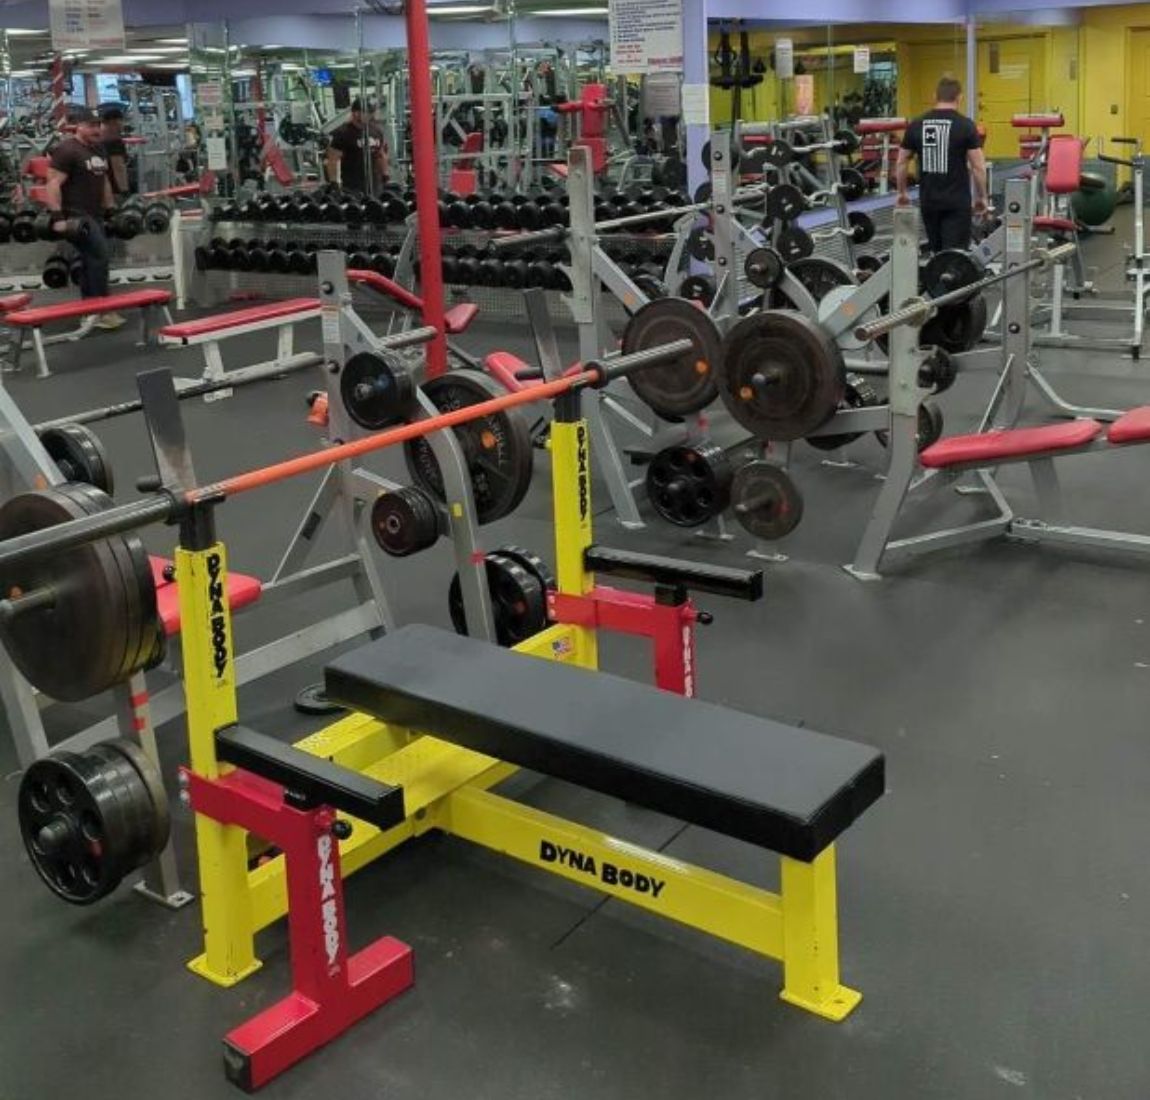 Fitness 2k Gym Gallery (square) (7)